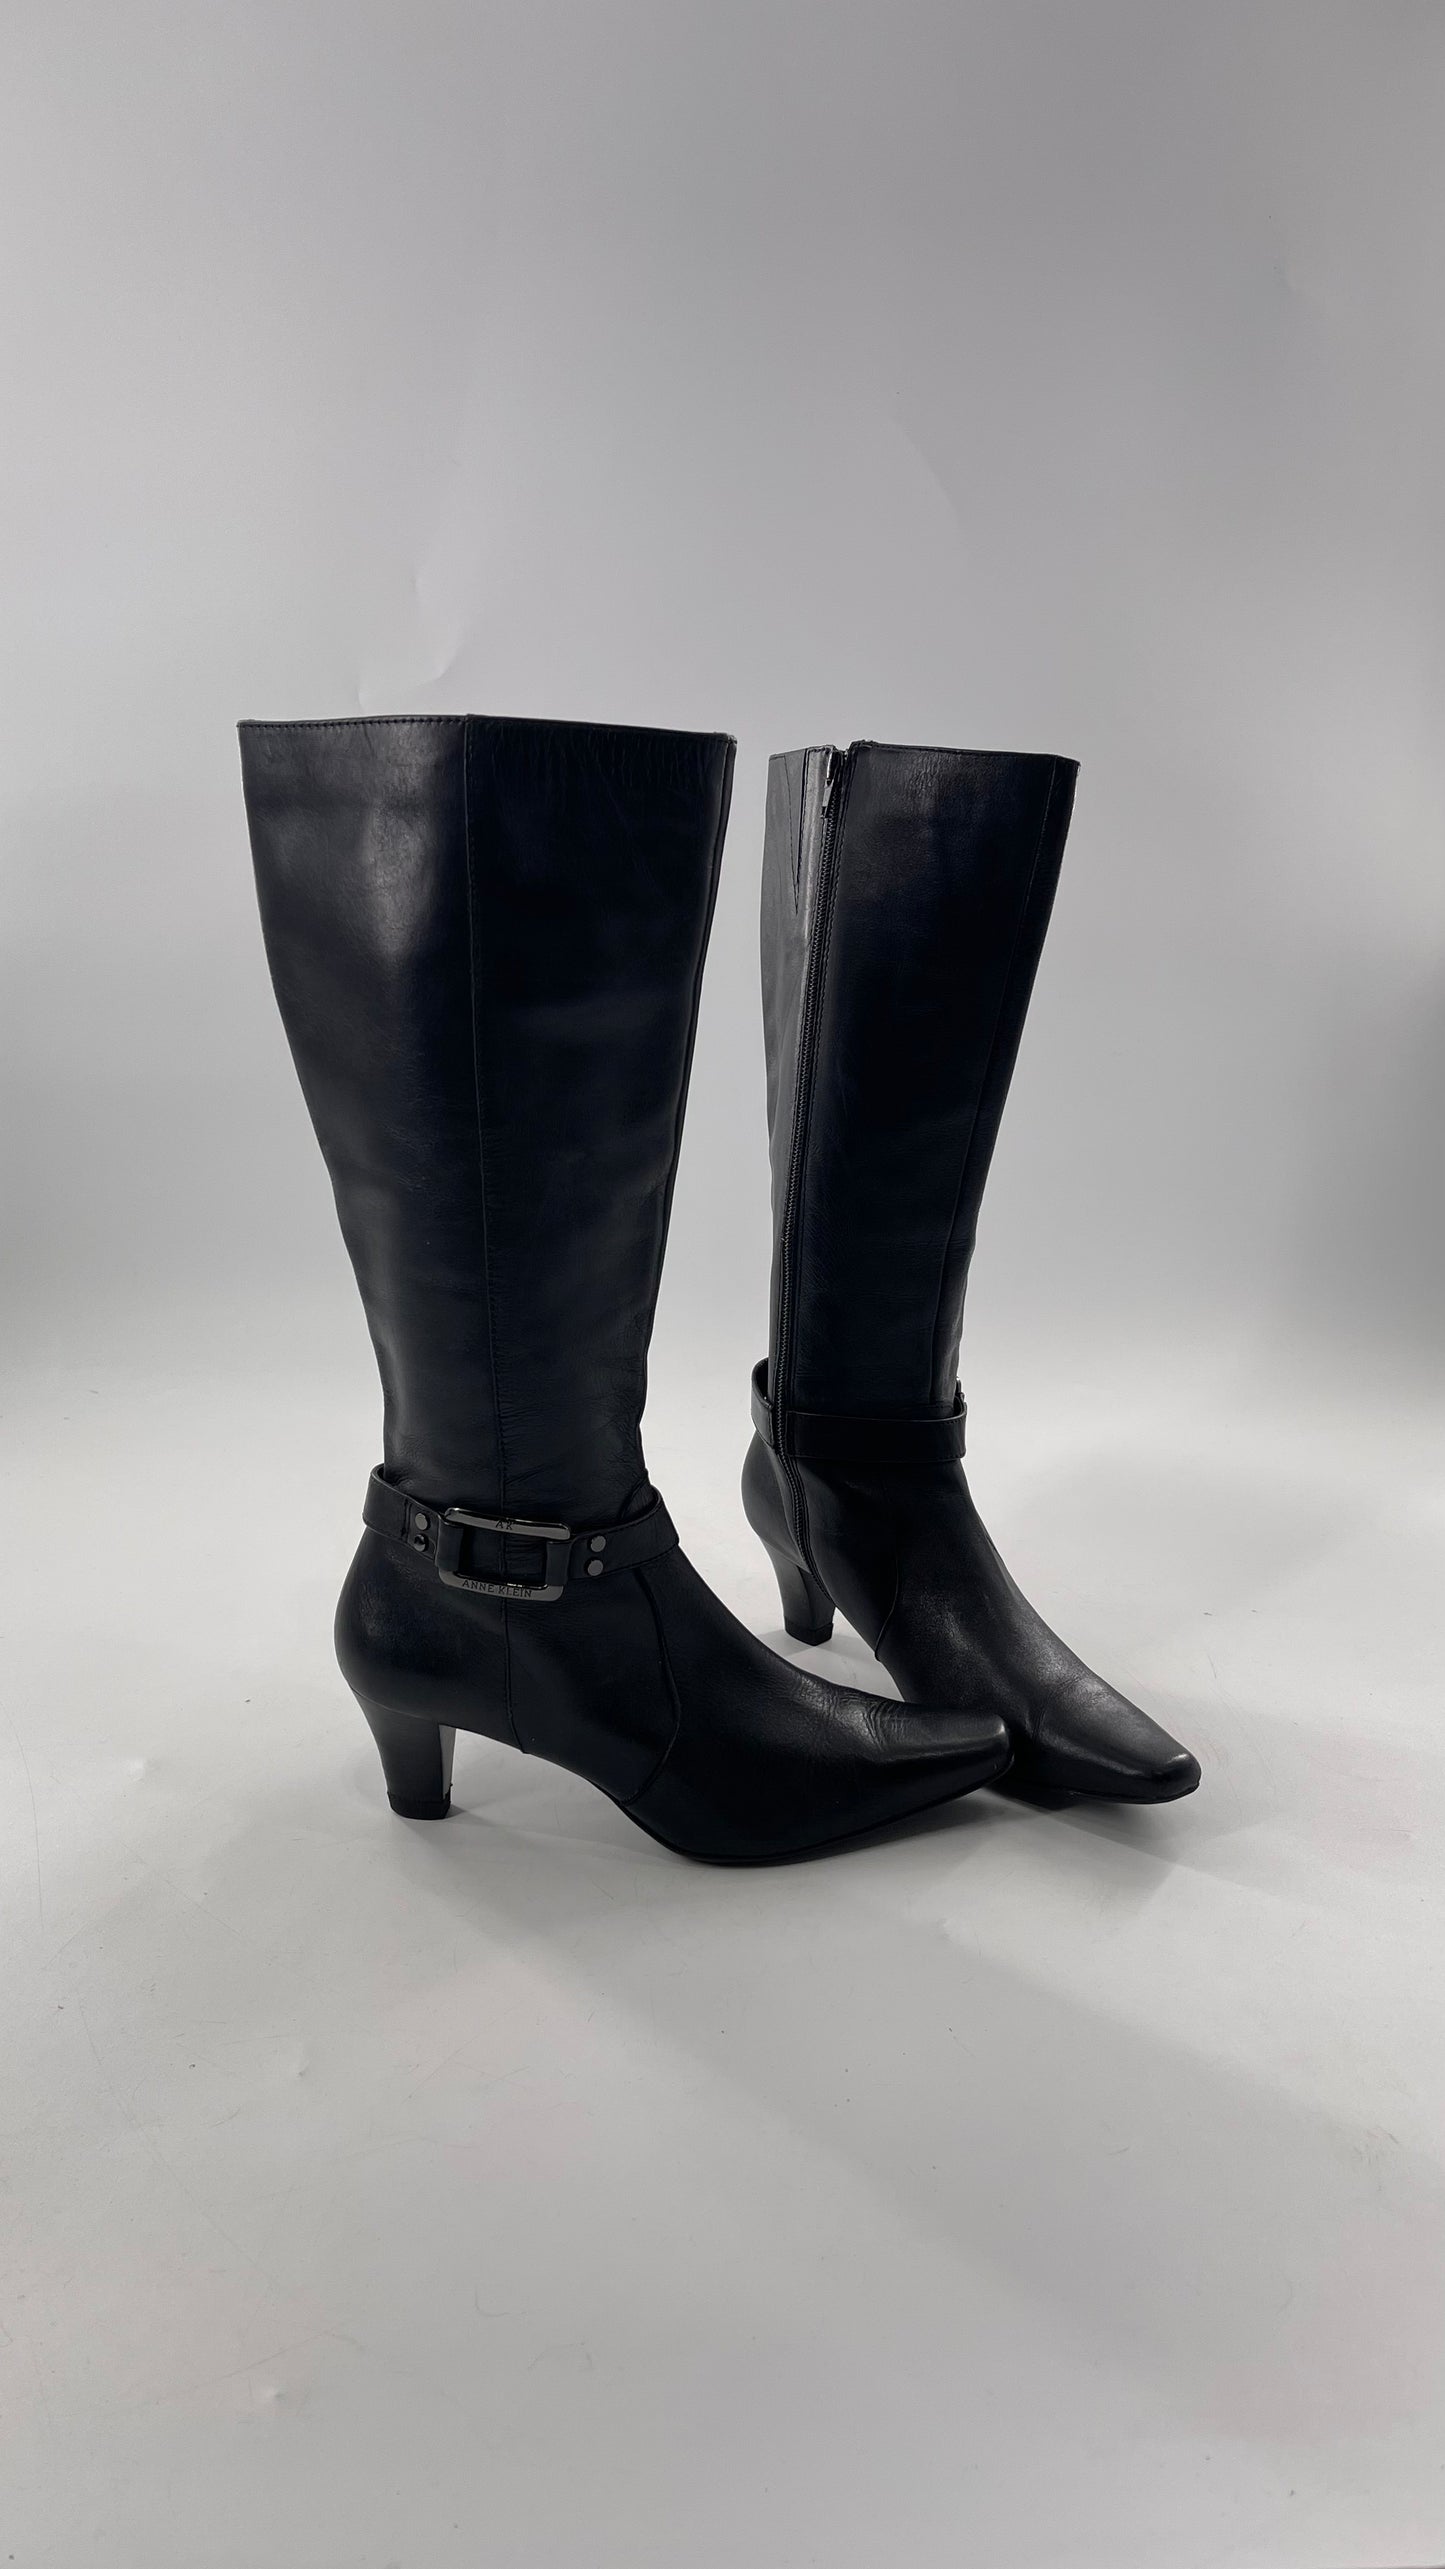 Vintage Black Anne Klein Leather Knee High Boots with Pointed Toe and Ankle Metal Buckle Detail (8)